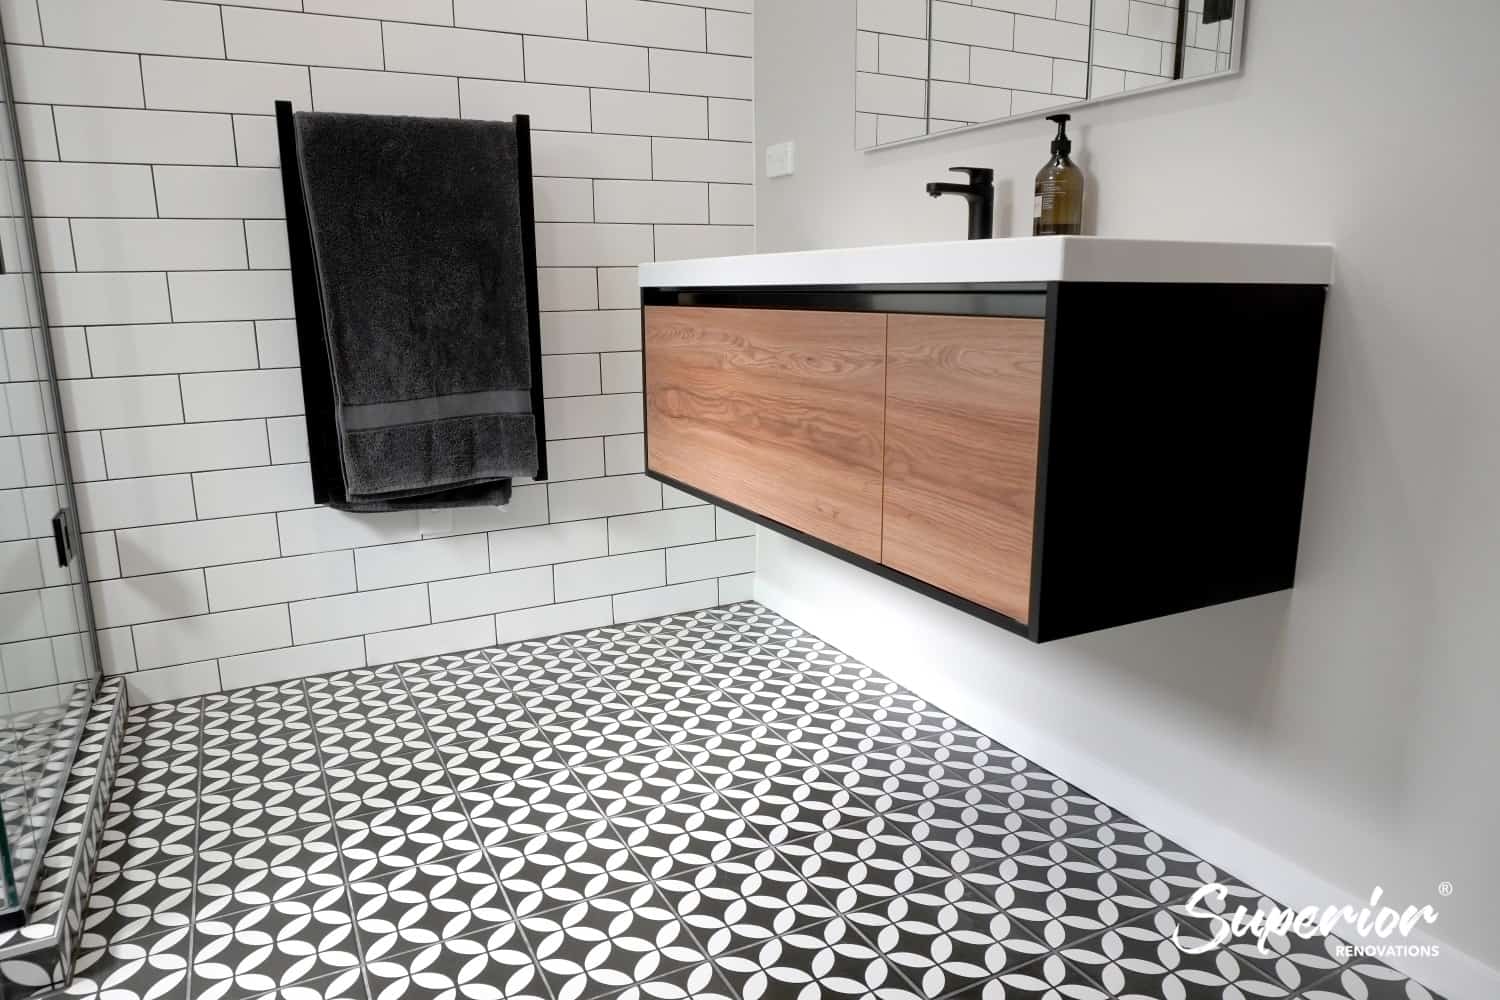 Top 15 Bathroom Design Trends In Nz For 2021 By Designers In Auckland